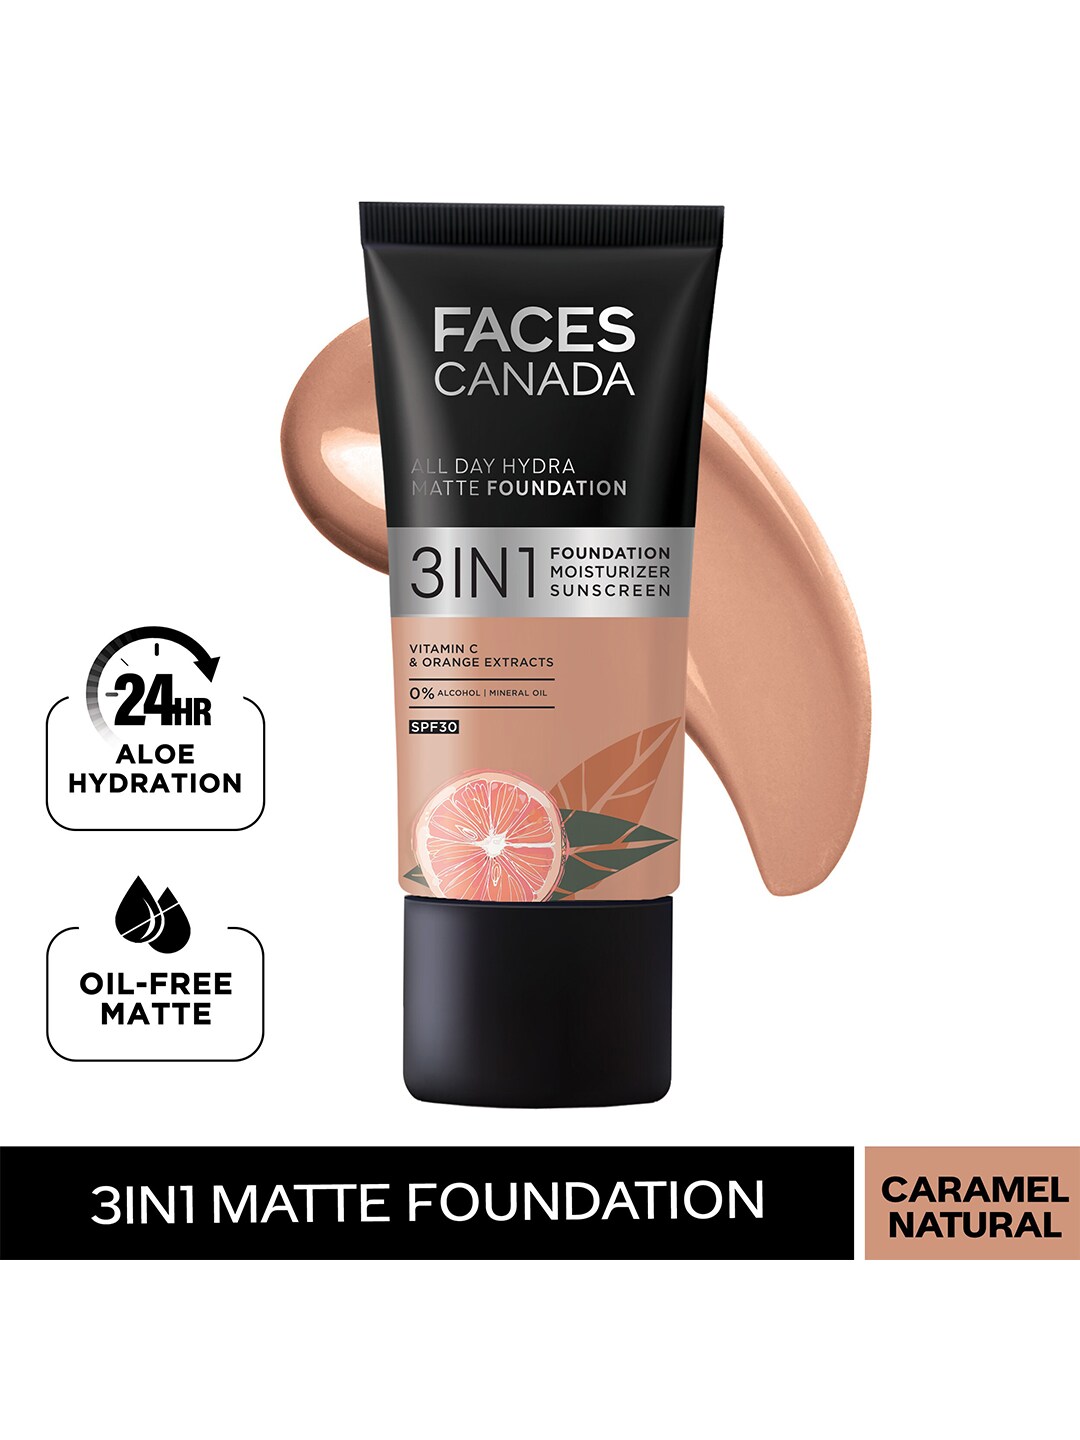 FACES CANADA 3-in-1 All Day Hydra Matte Foundation 25 ml - Caramel Natural 023 Price in India